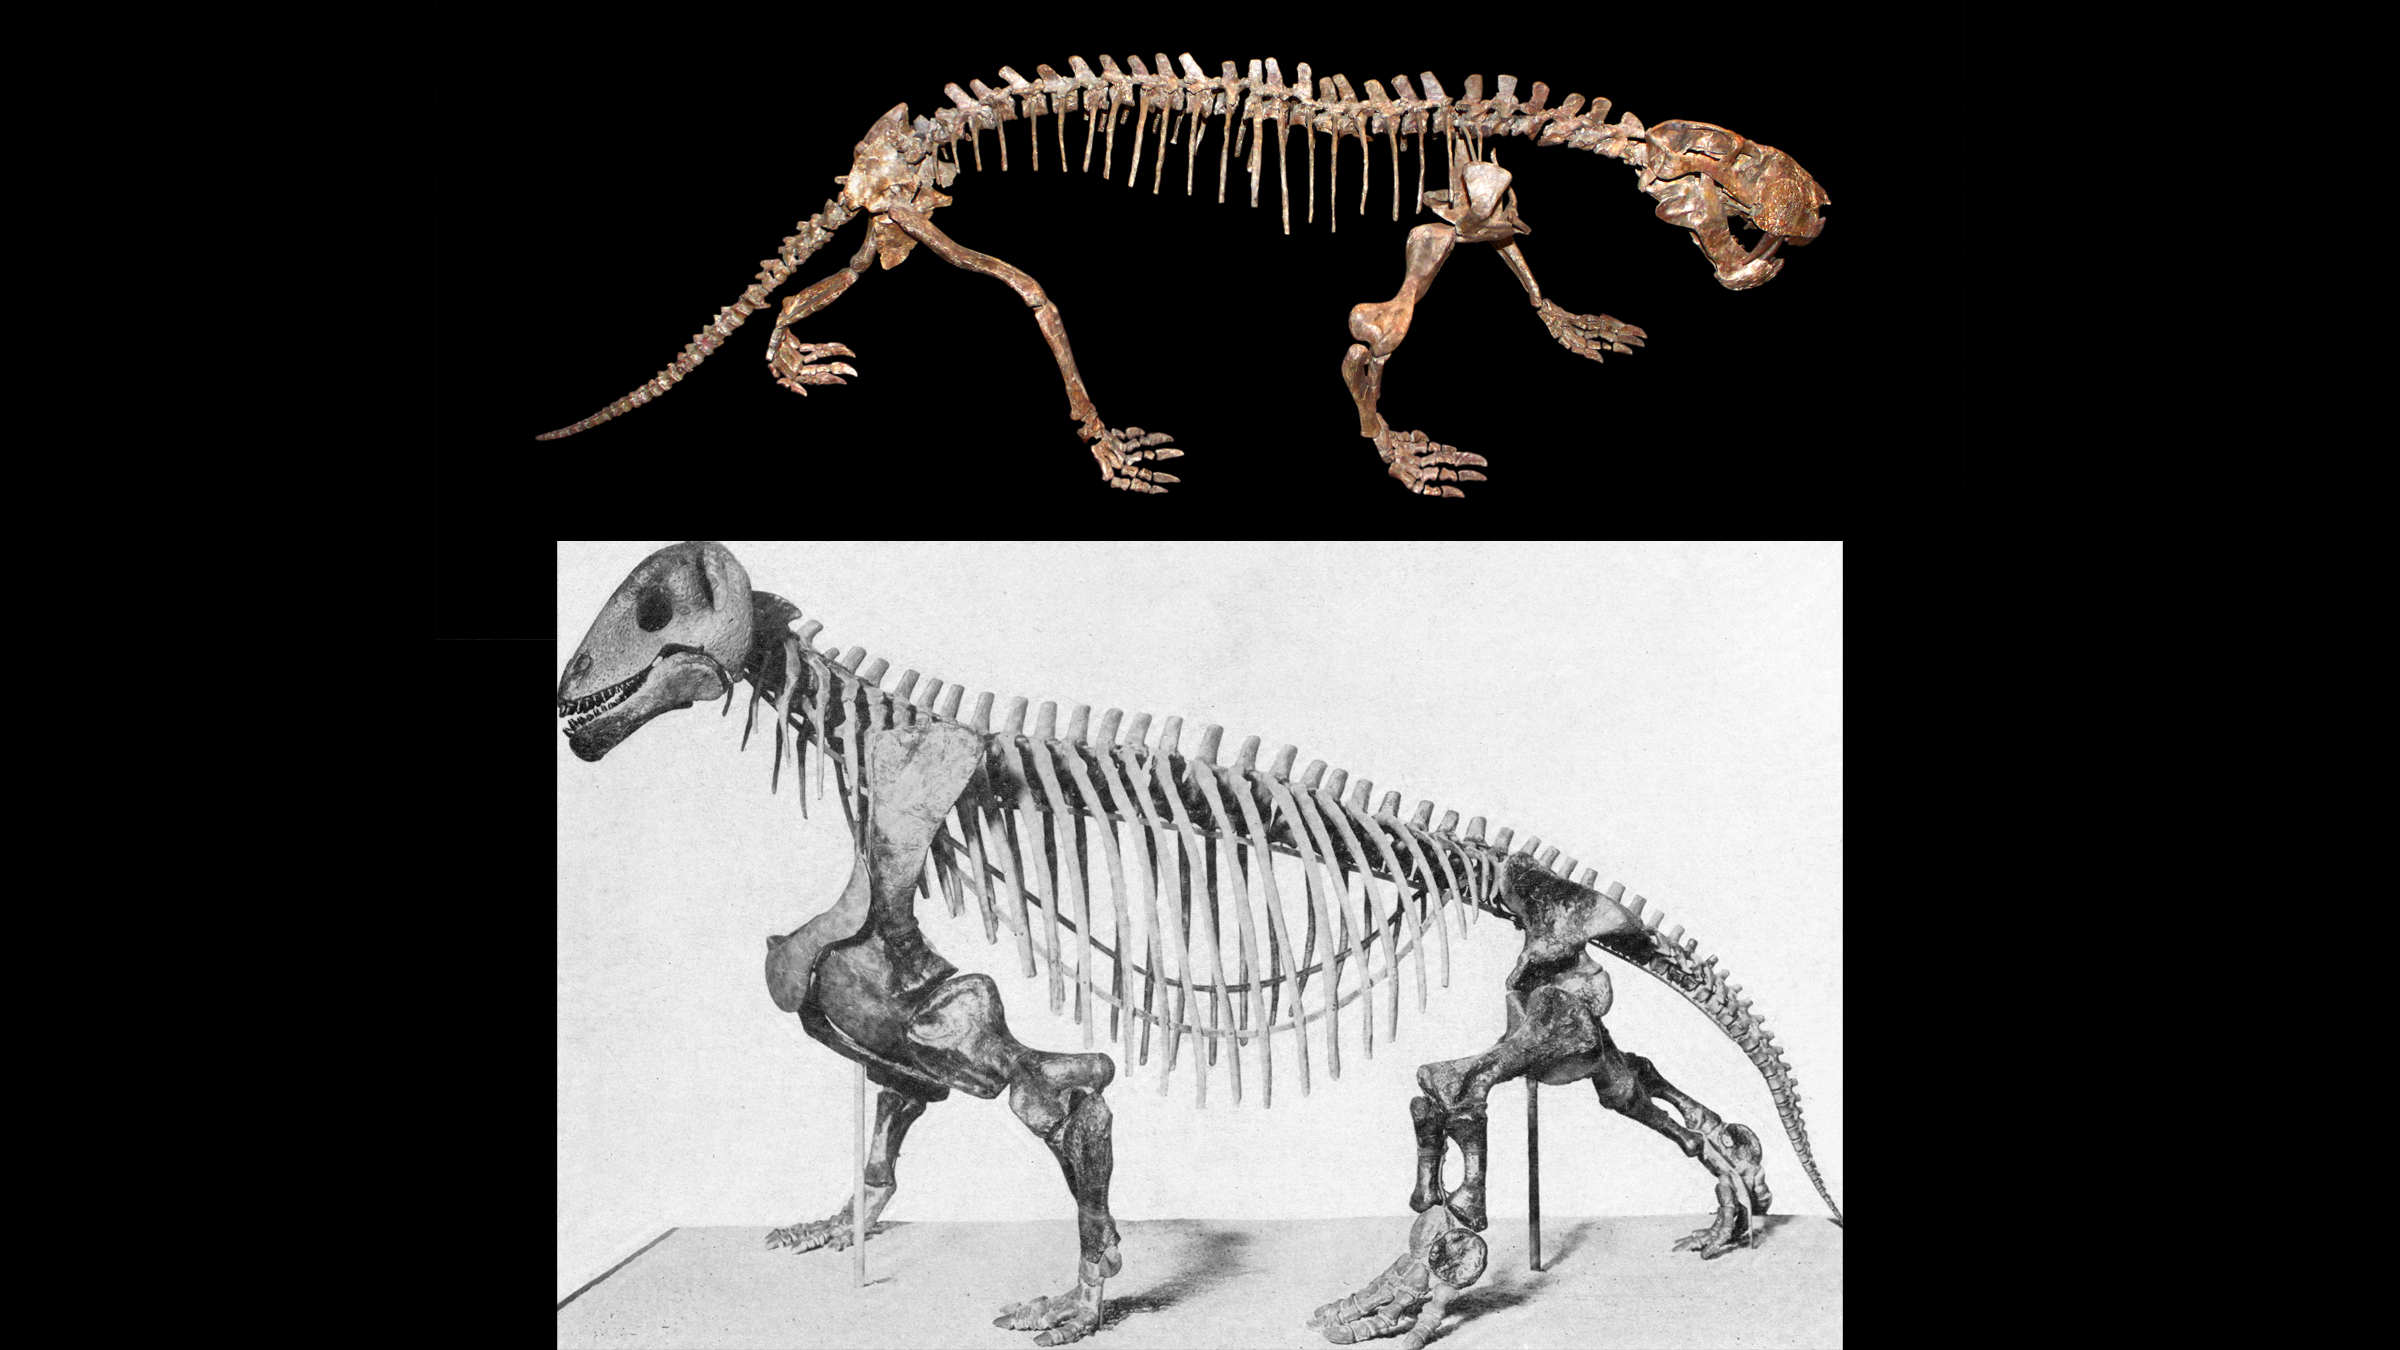 Two therapsids, the primitive synapsid precursors of mammals: a saber-toothed gorgonopsid (top) and the stout dinocephalian Moschops (bottom).